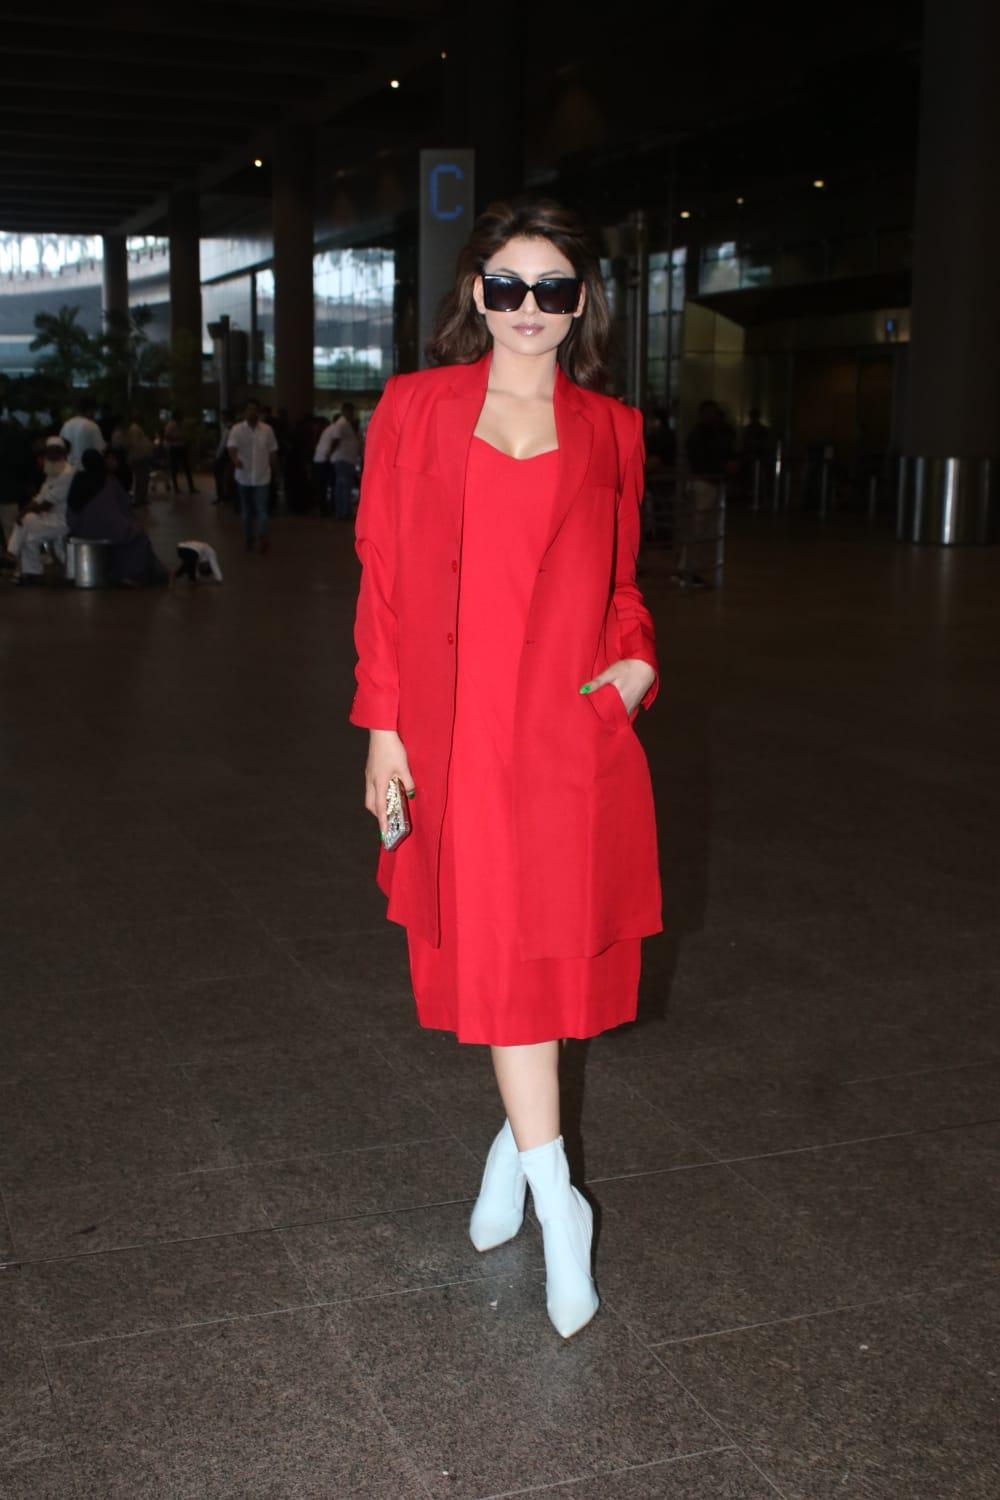 She was donning an all-red ensemble that exuded confidence and style.